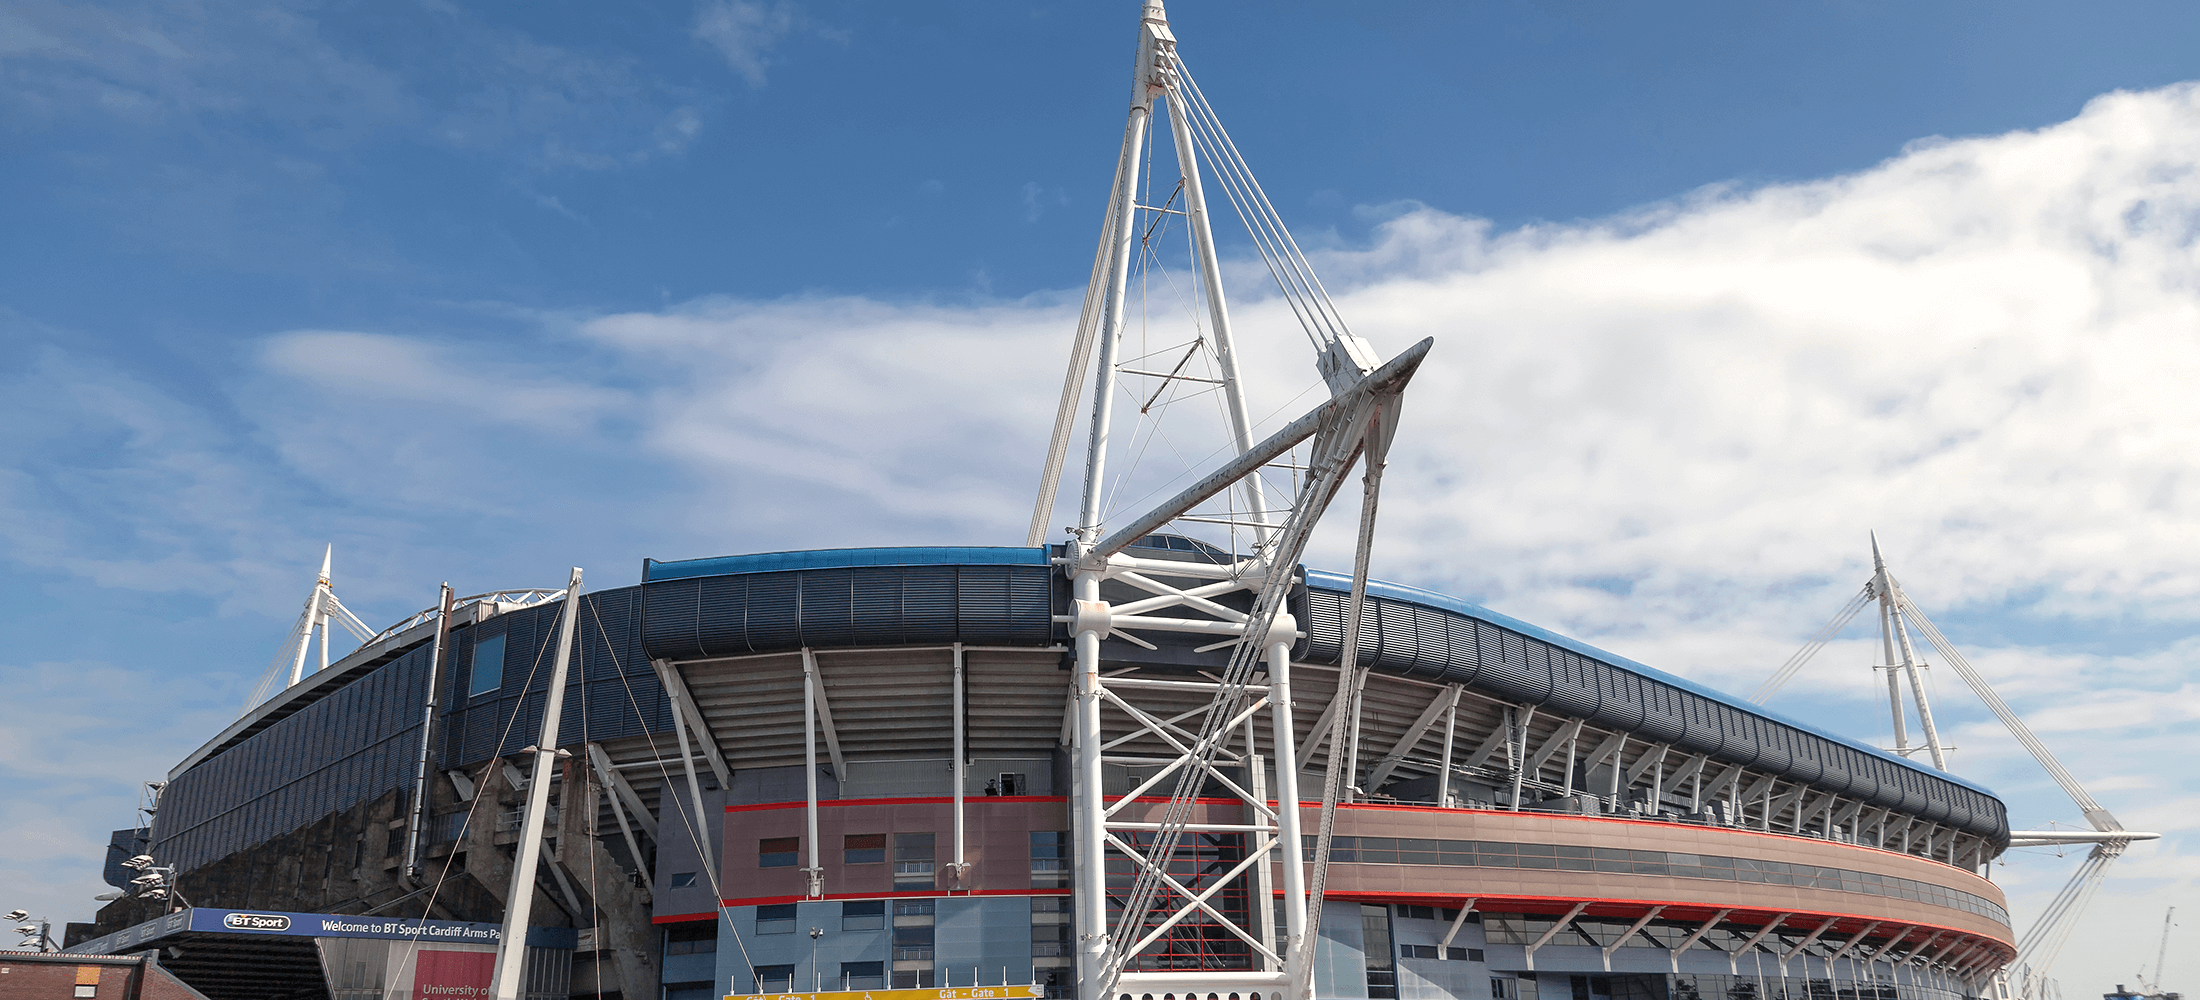 How the Principality Stadium puts Cardiff on the world stage